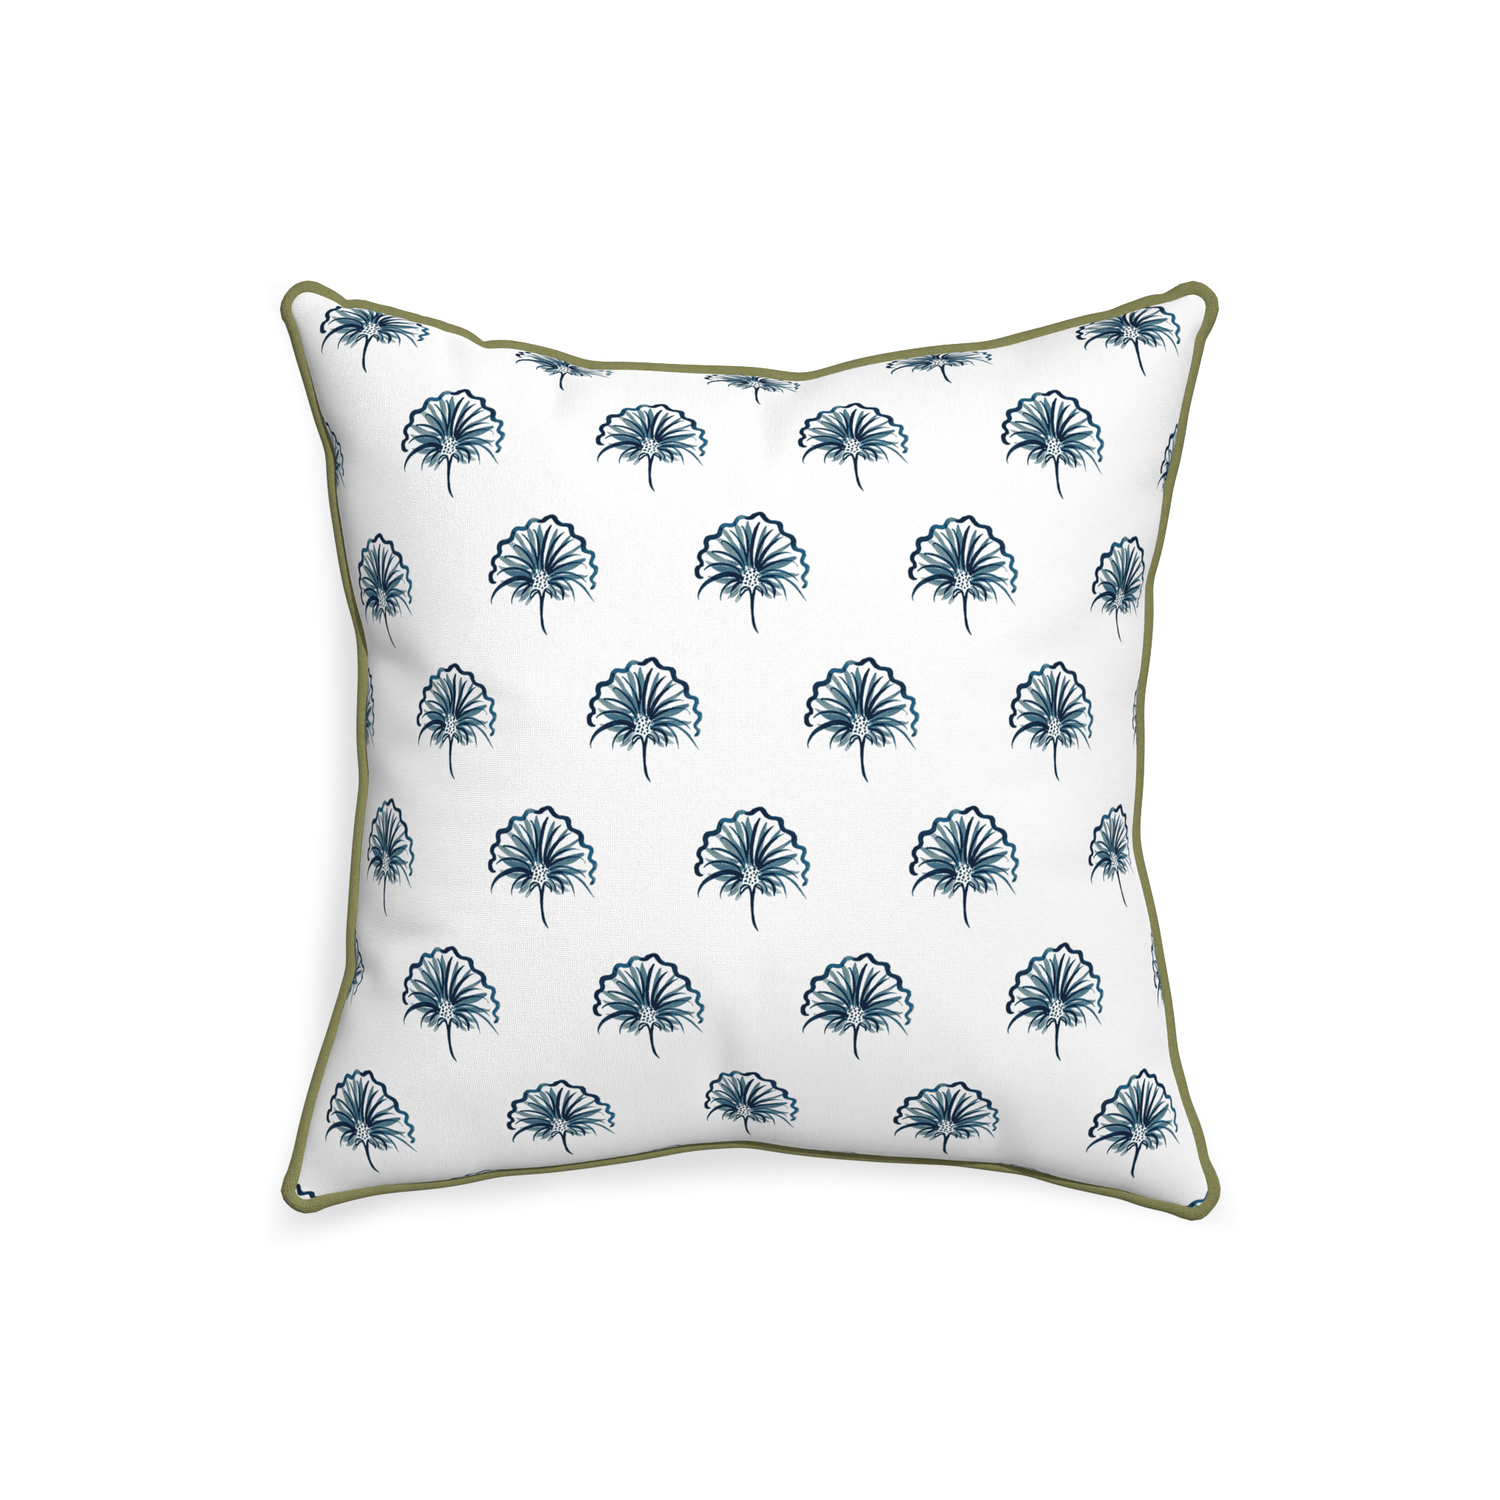 20-square penelope midnight custom pillow with moss piping on white background